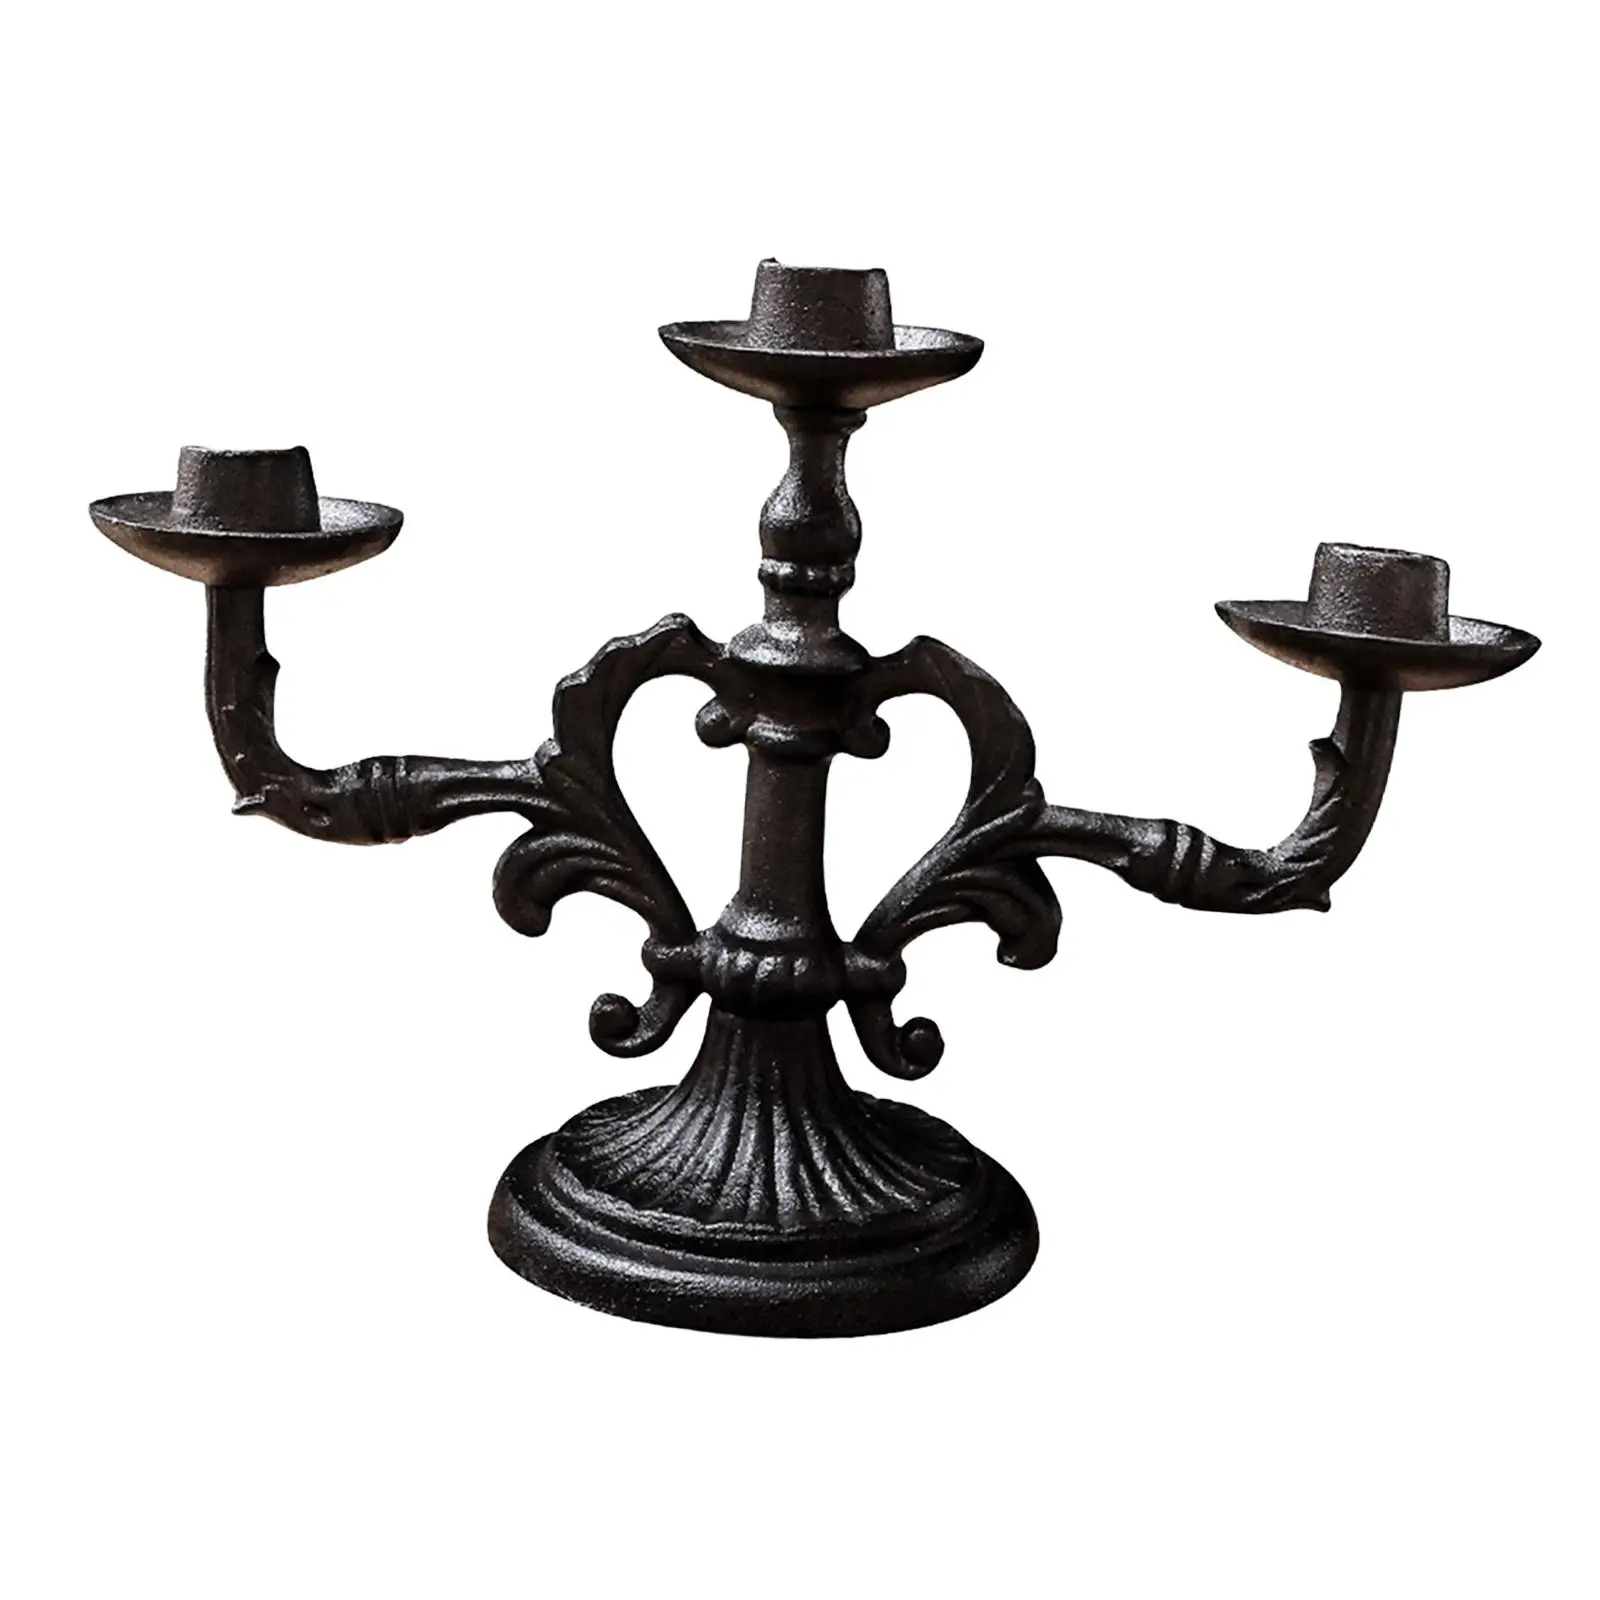 Nordic Candlestick Holders Iron Candle Holder for Home Decor Holiday Table Centerpiece Housewarming Gift